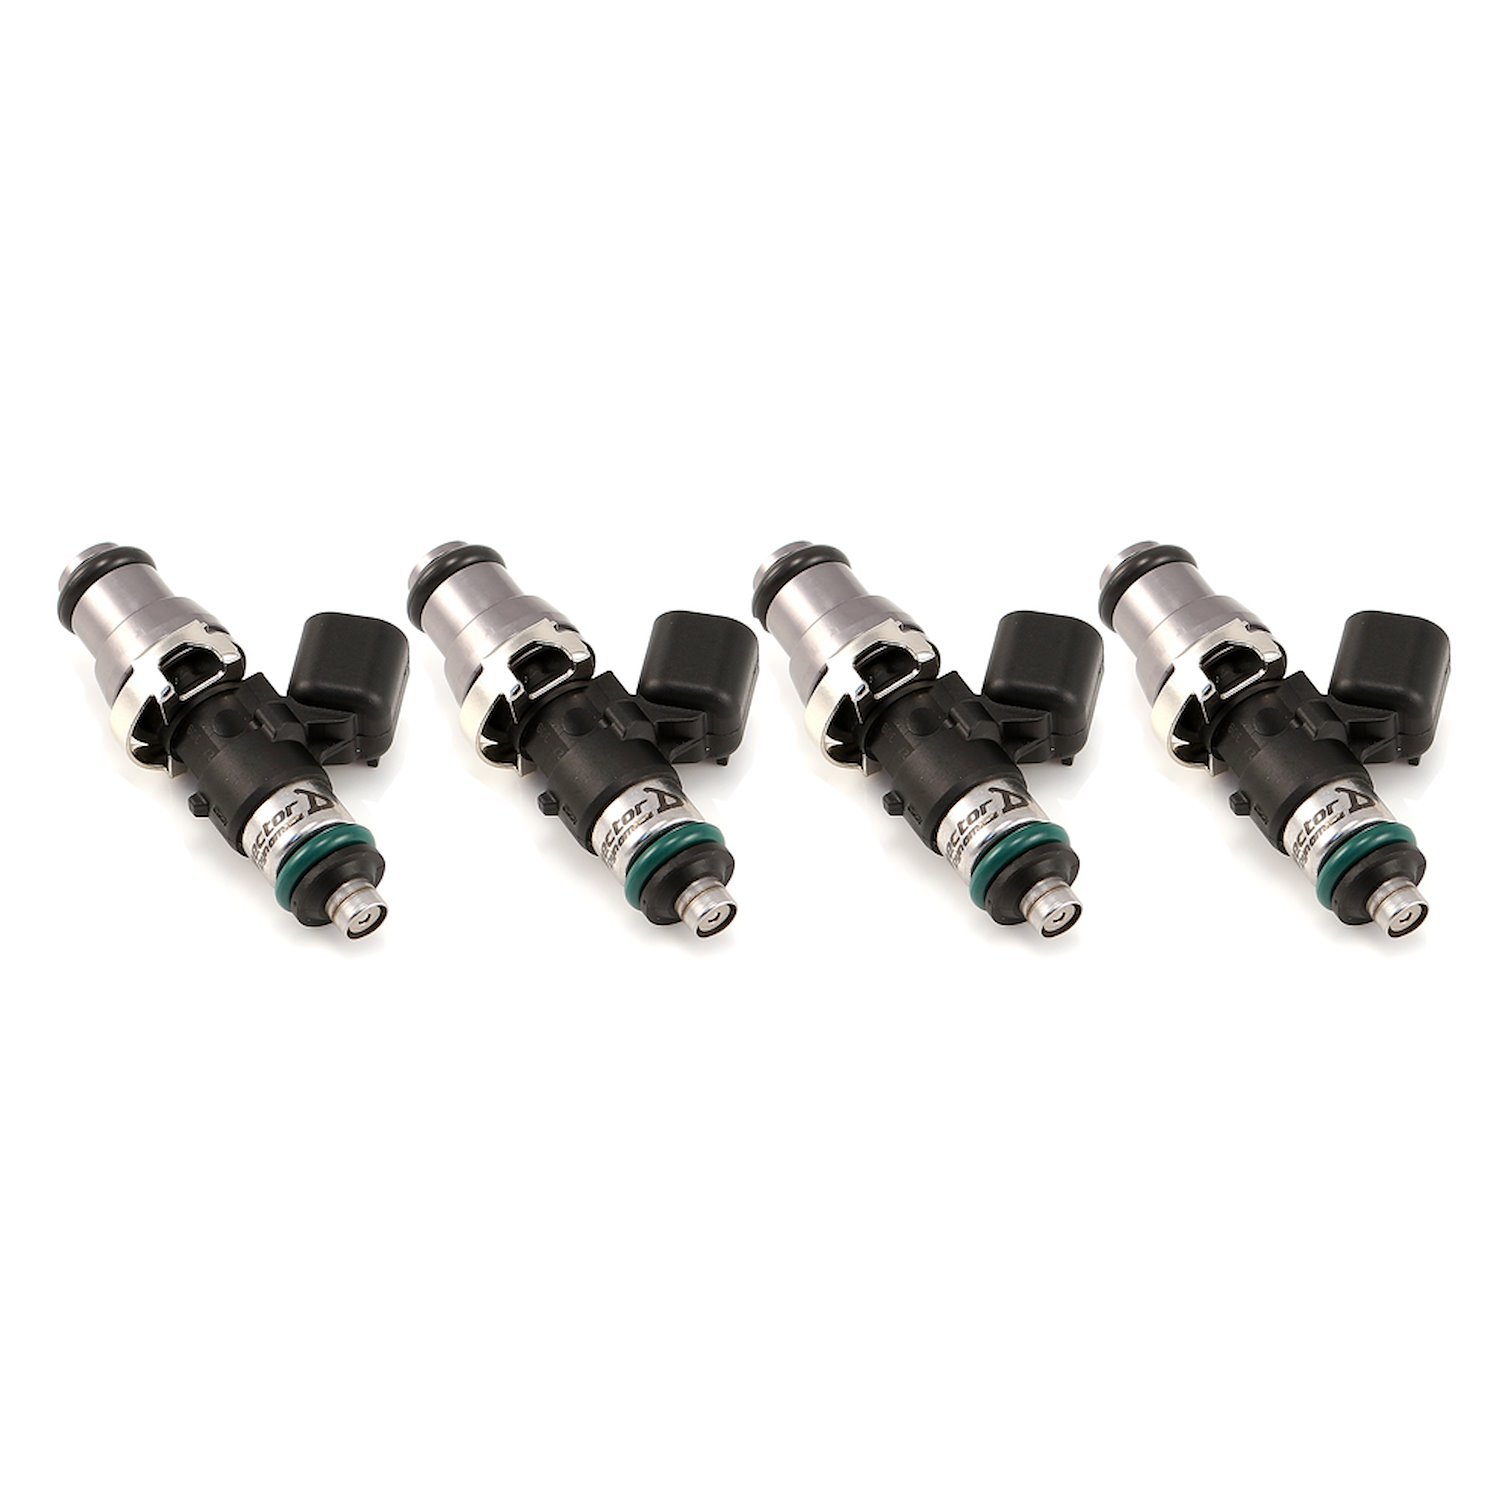 1300.48.14.14.4 1340cc Fuel Injector Set, 48 mm Length, 14 mm Grey Top, 14 mm Lower O-Ring